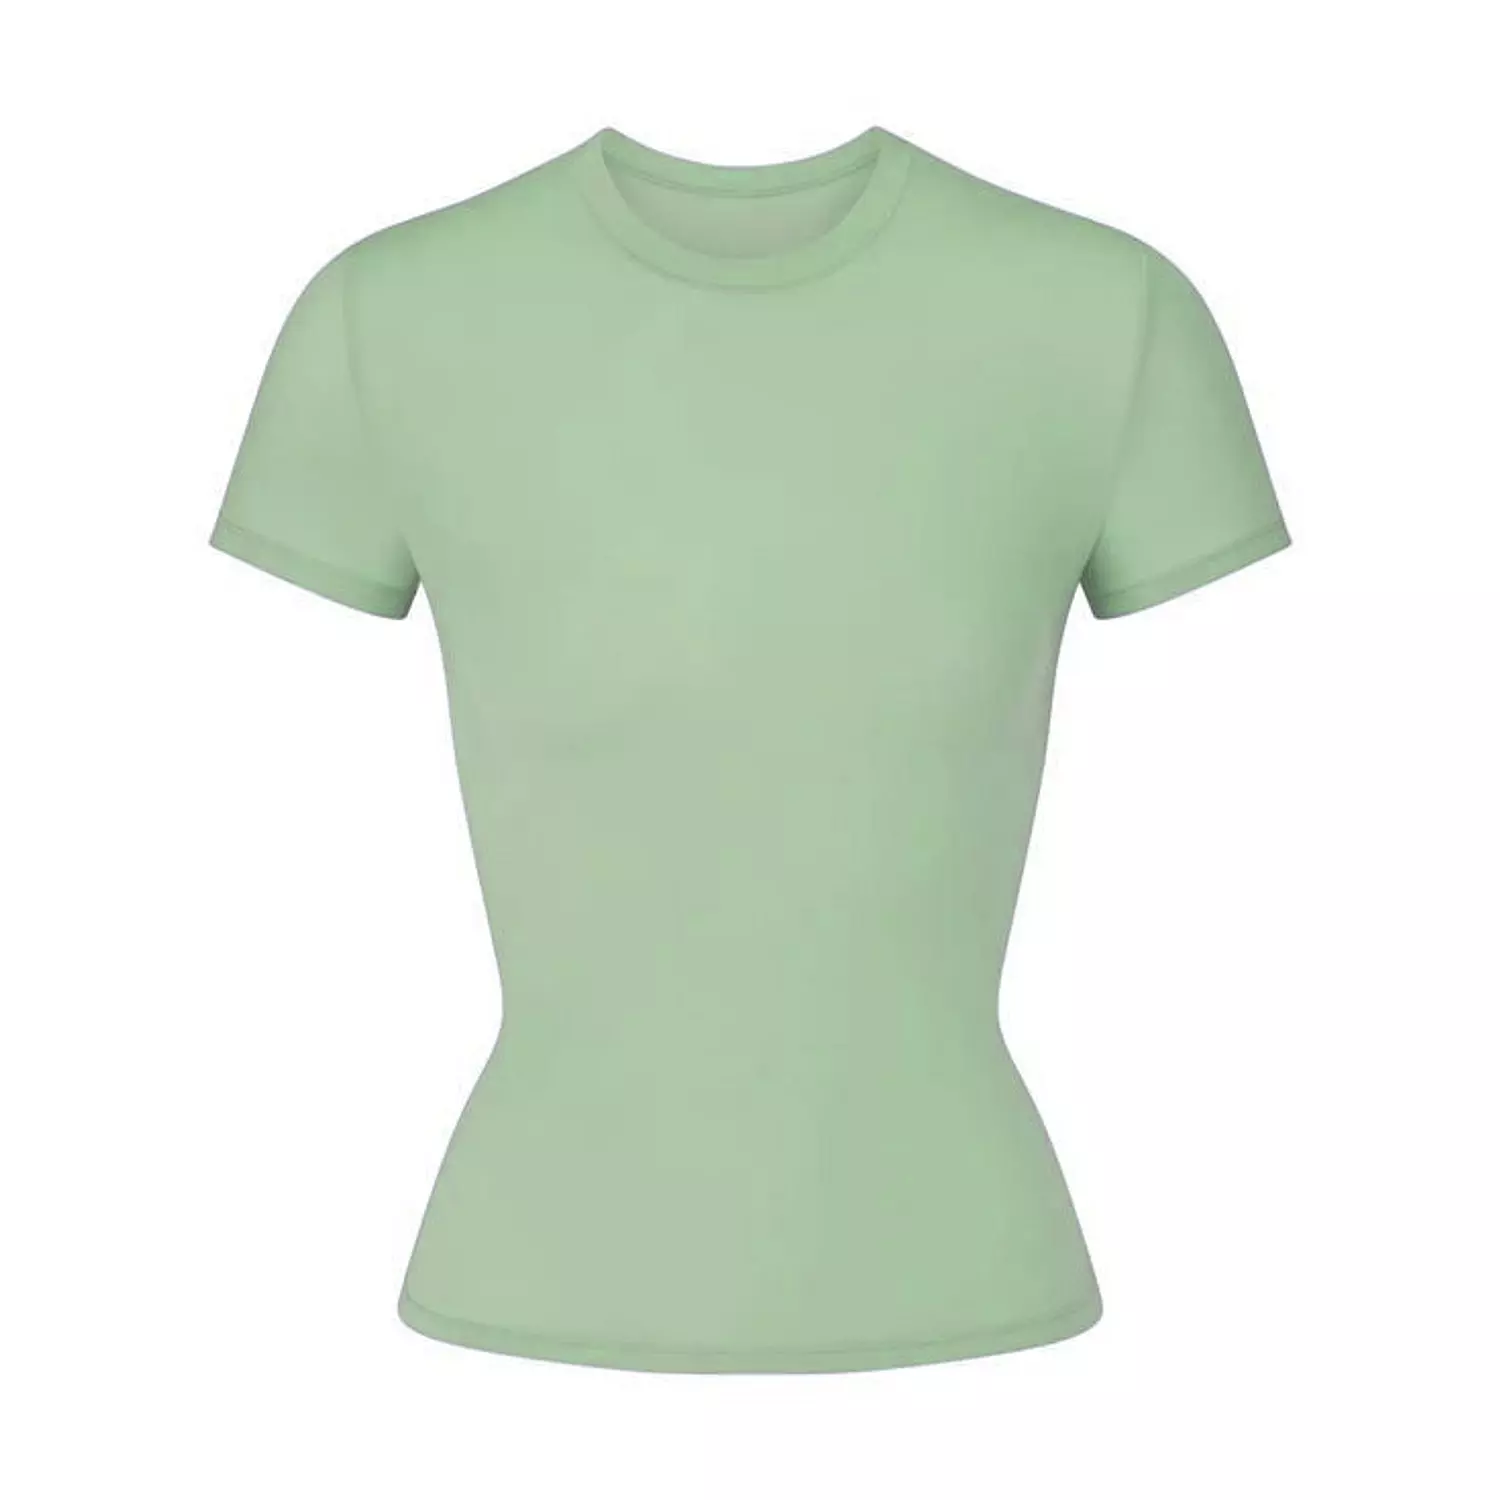 Mint Basic Top hover image